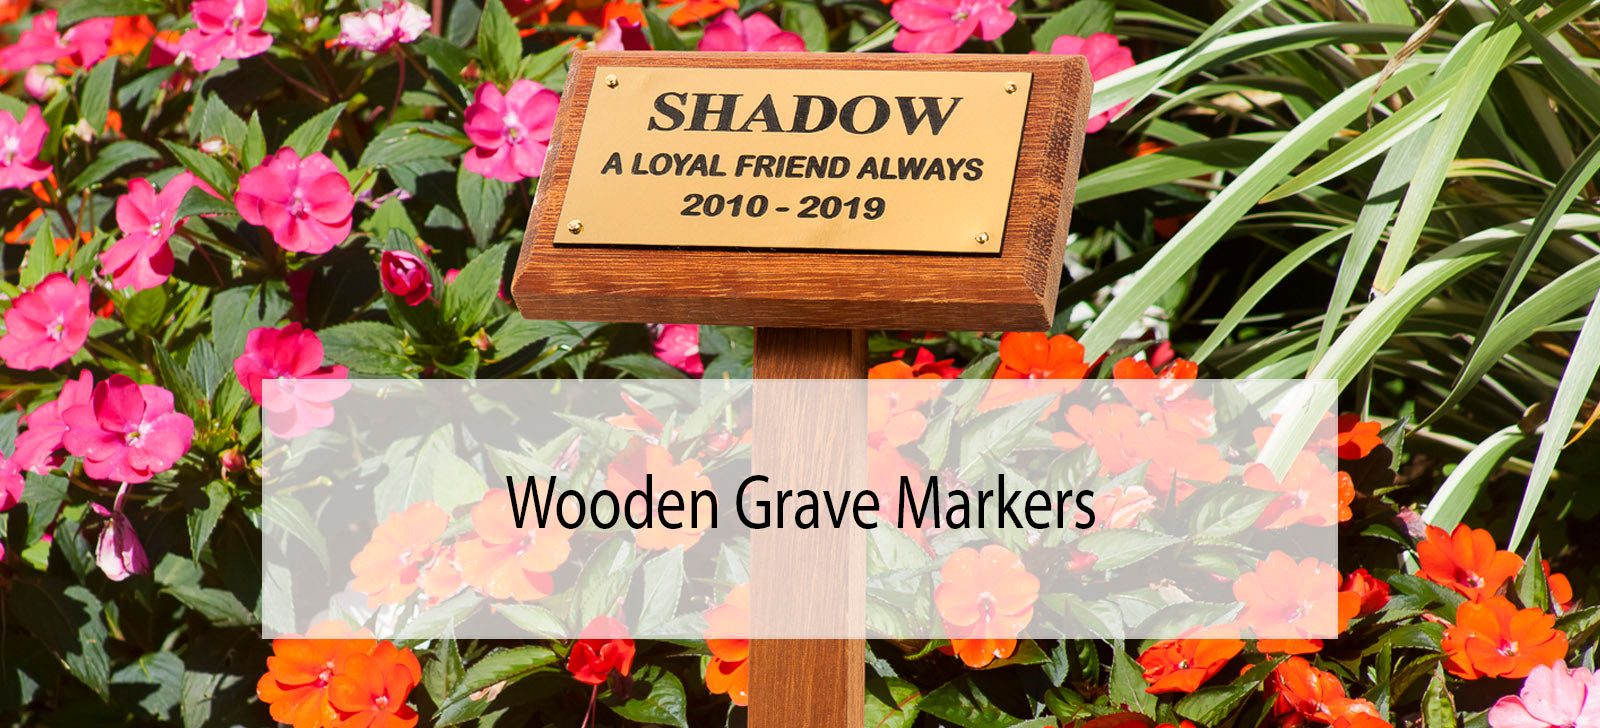 Wooden Grave Markers